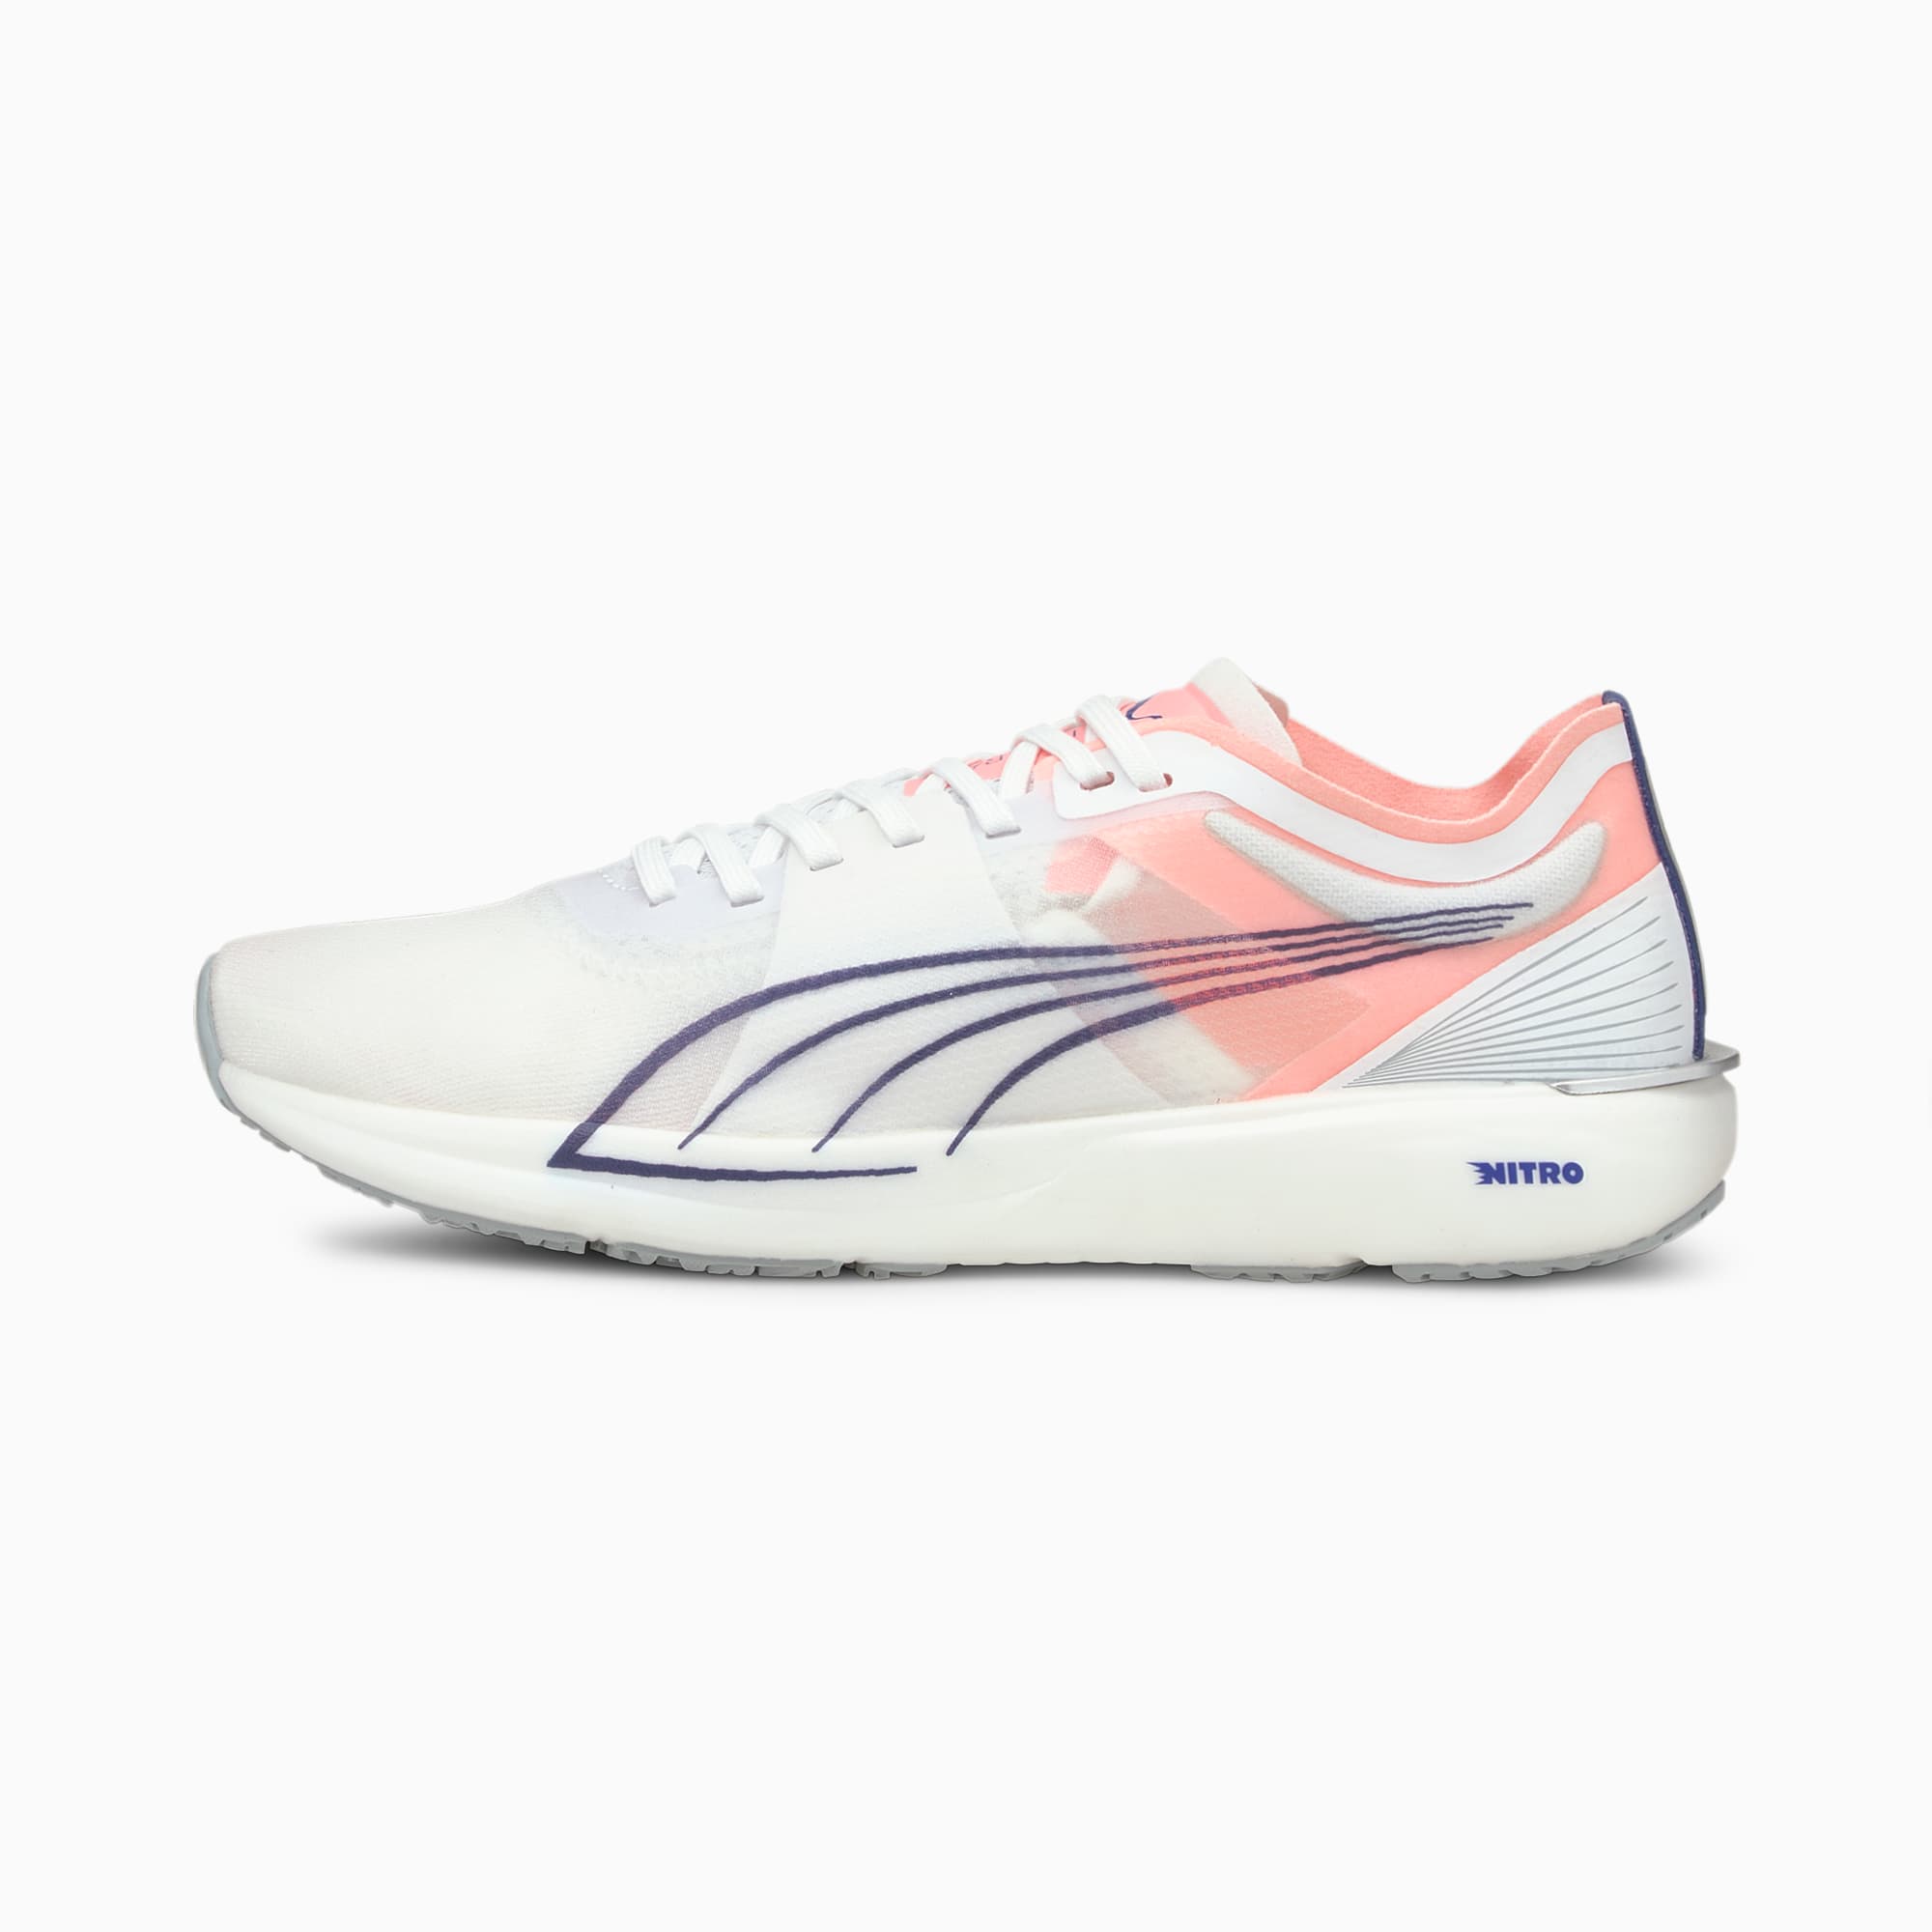 PUMA Chaussures de course Liberate Nitro femme, Blanc/Rose, Taille 35.5, Chaussures